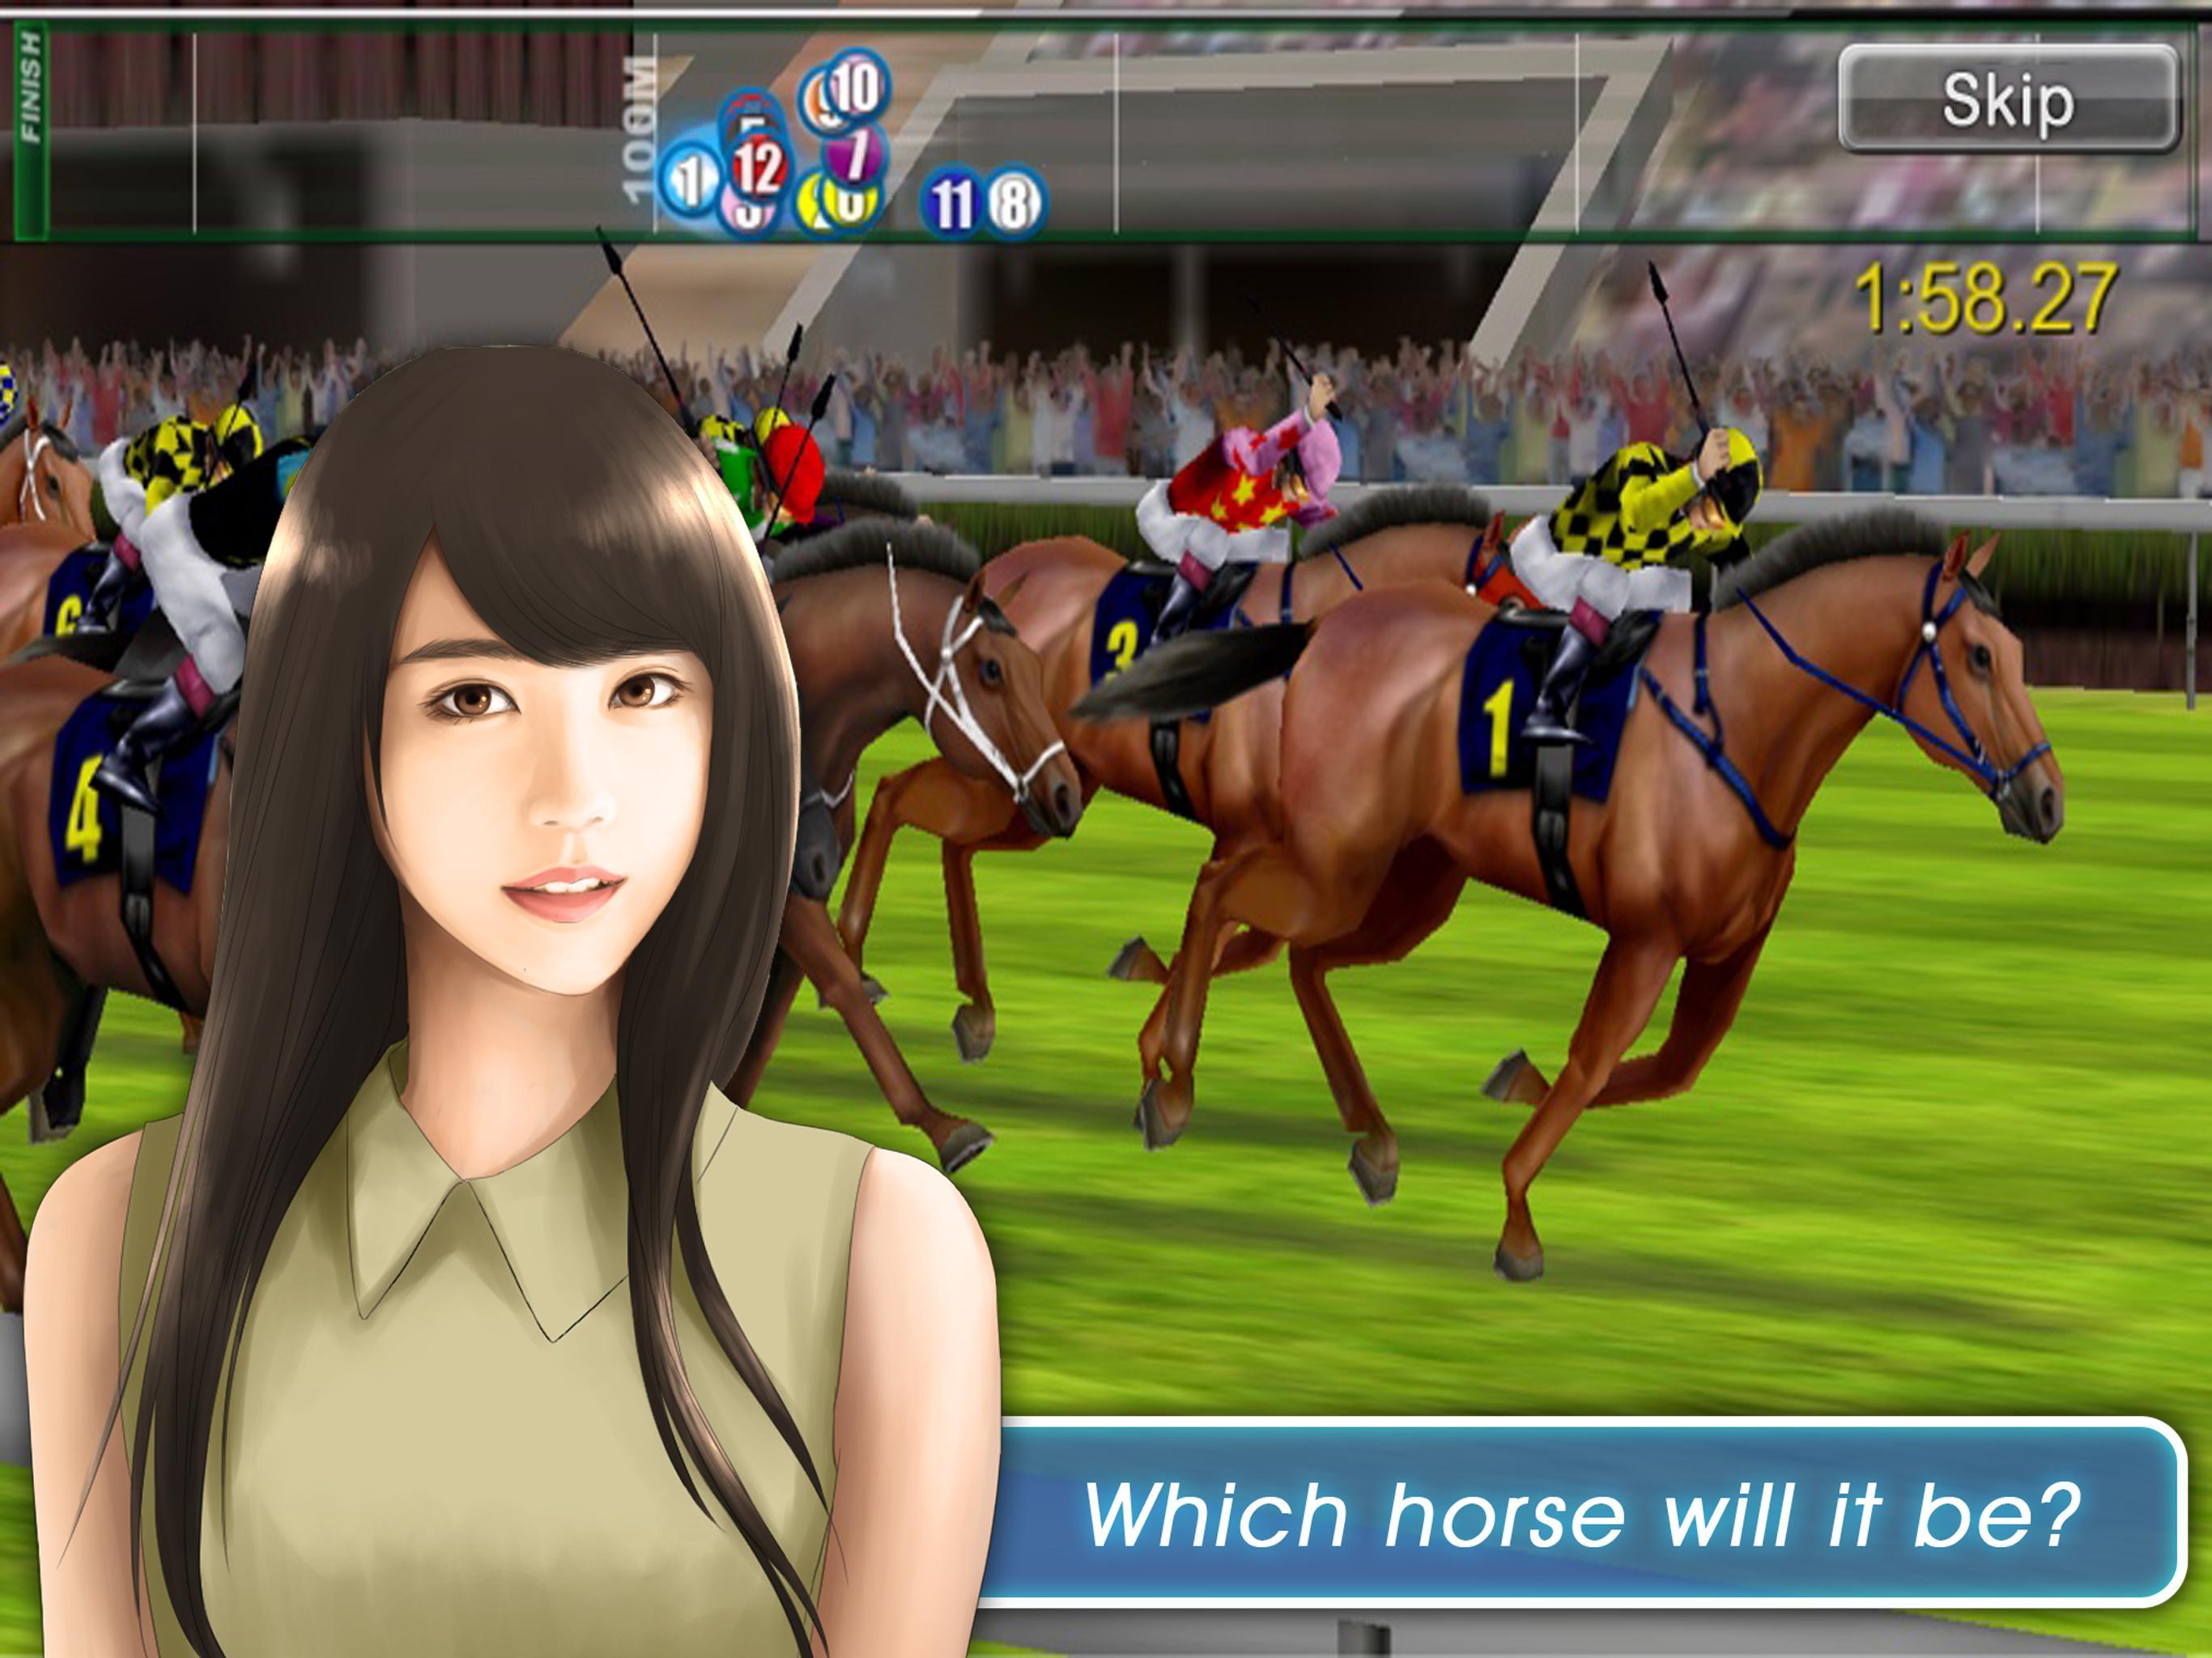 Horse betting game for android forexindo surabaya indonesia